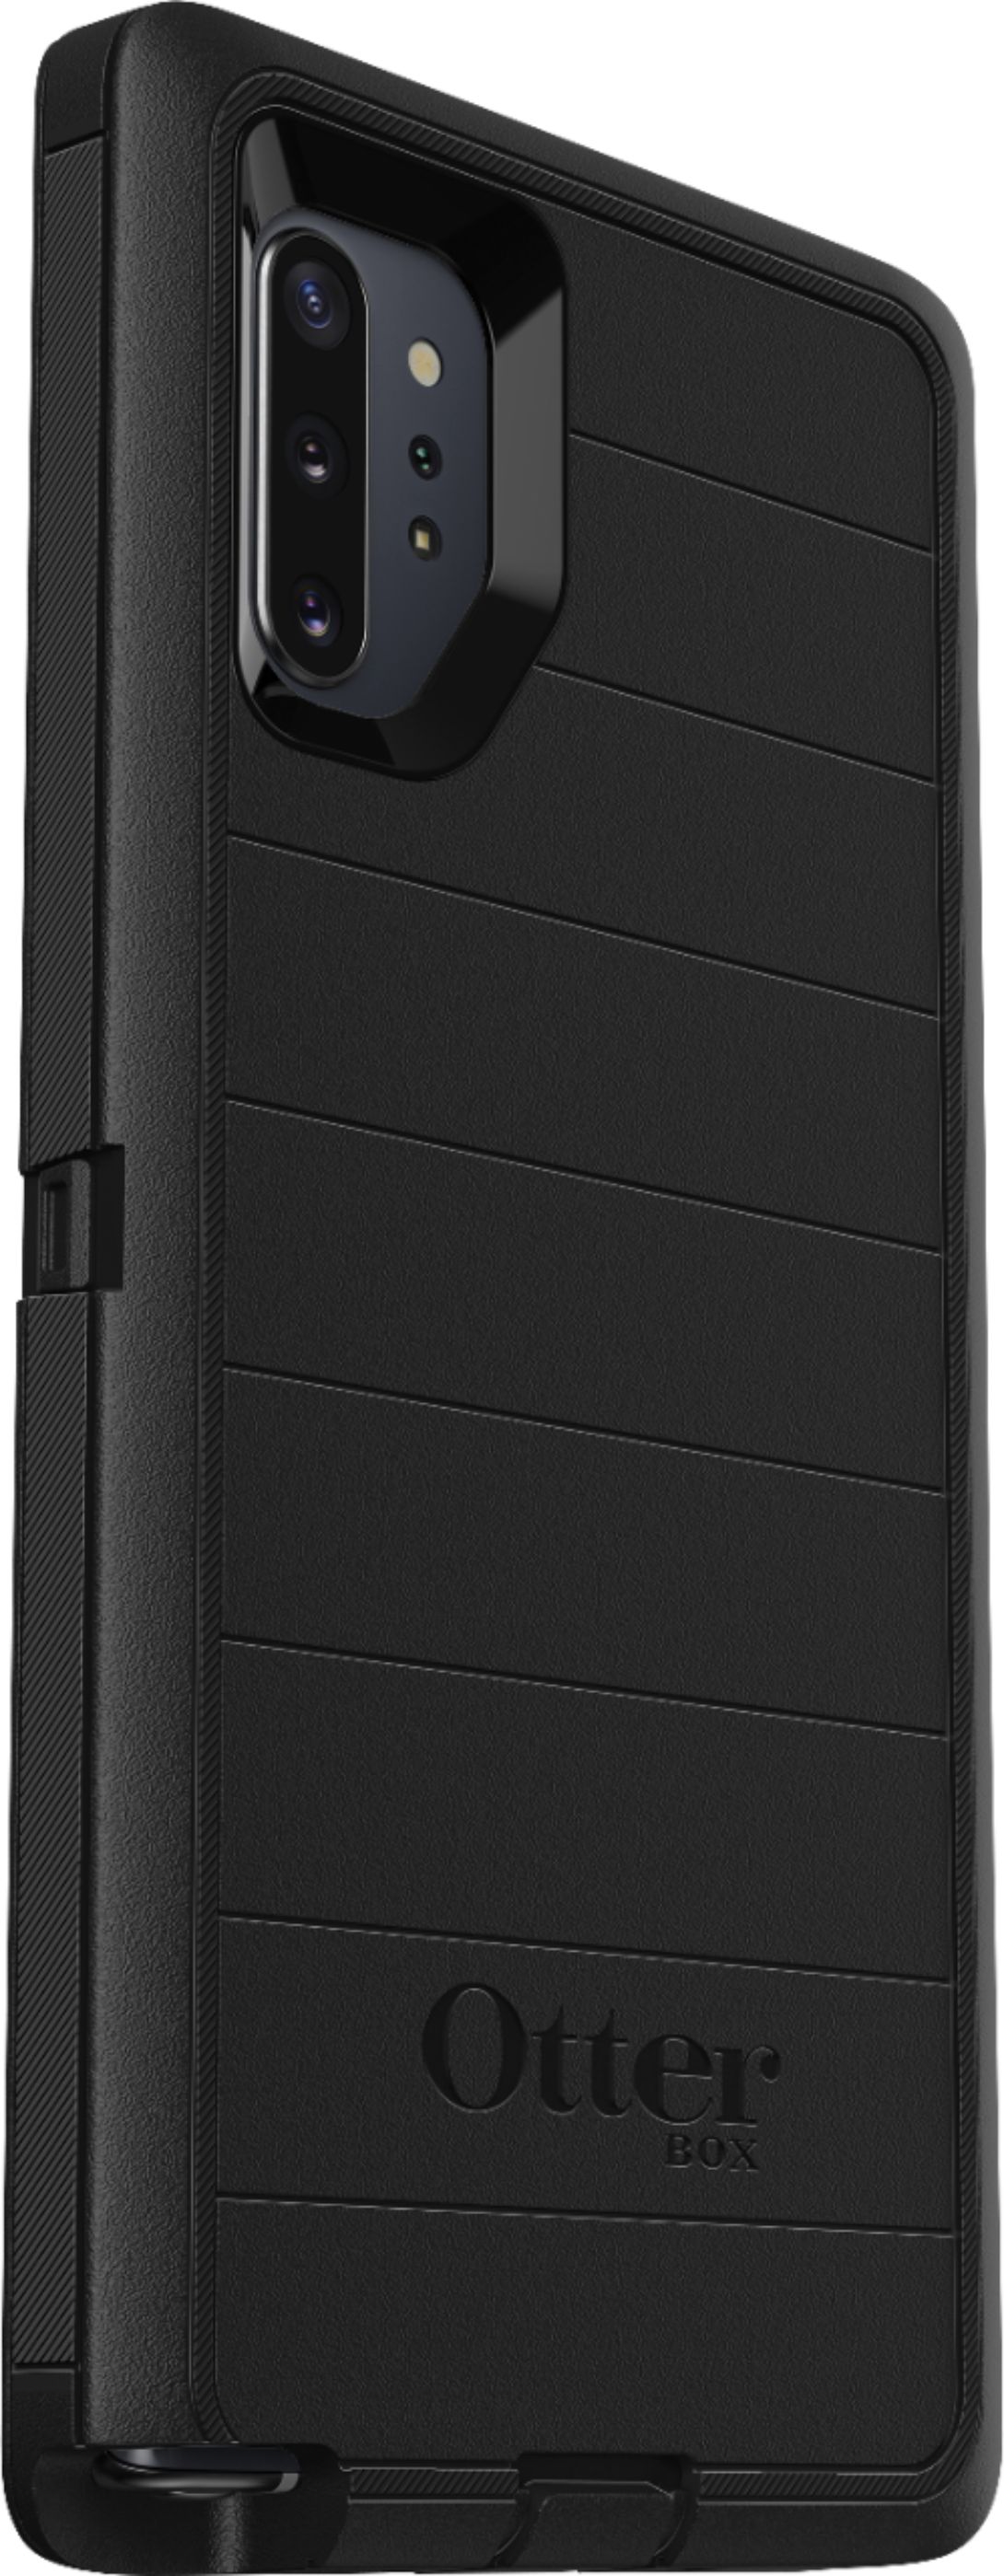 Angle View: OtterBox - Defender Series Pro Case for Samsung Galaxy Note10+ and Note10+ 5G - Black